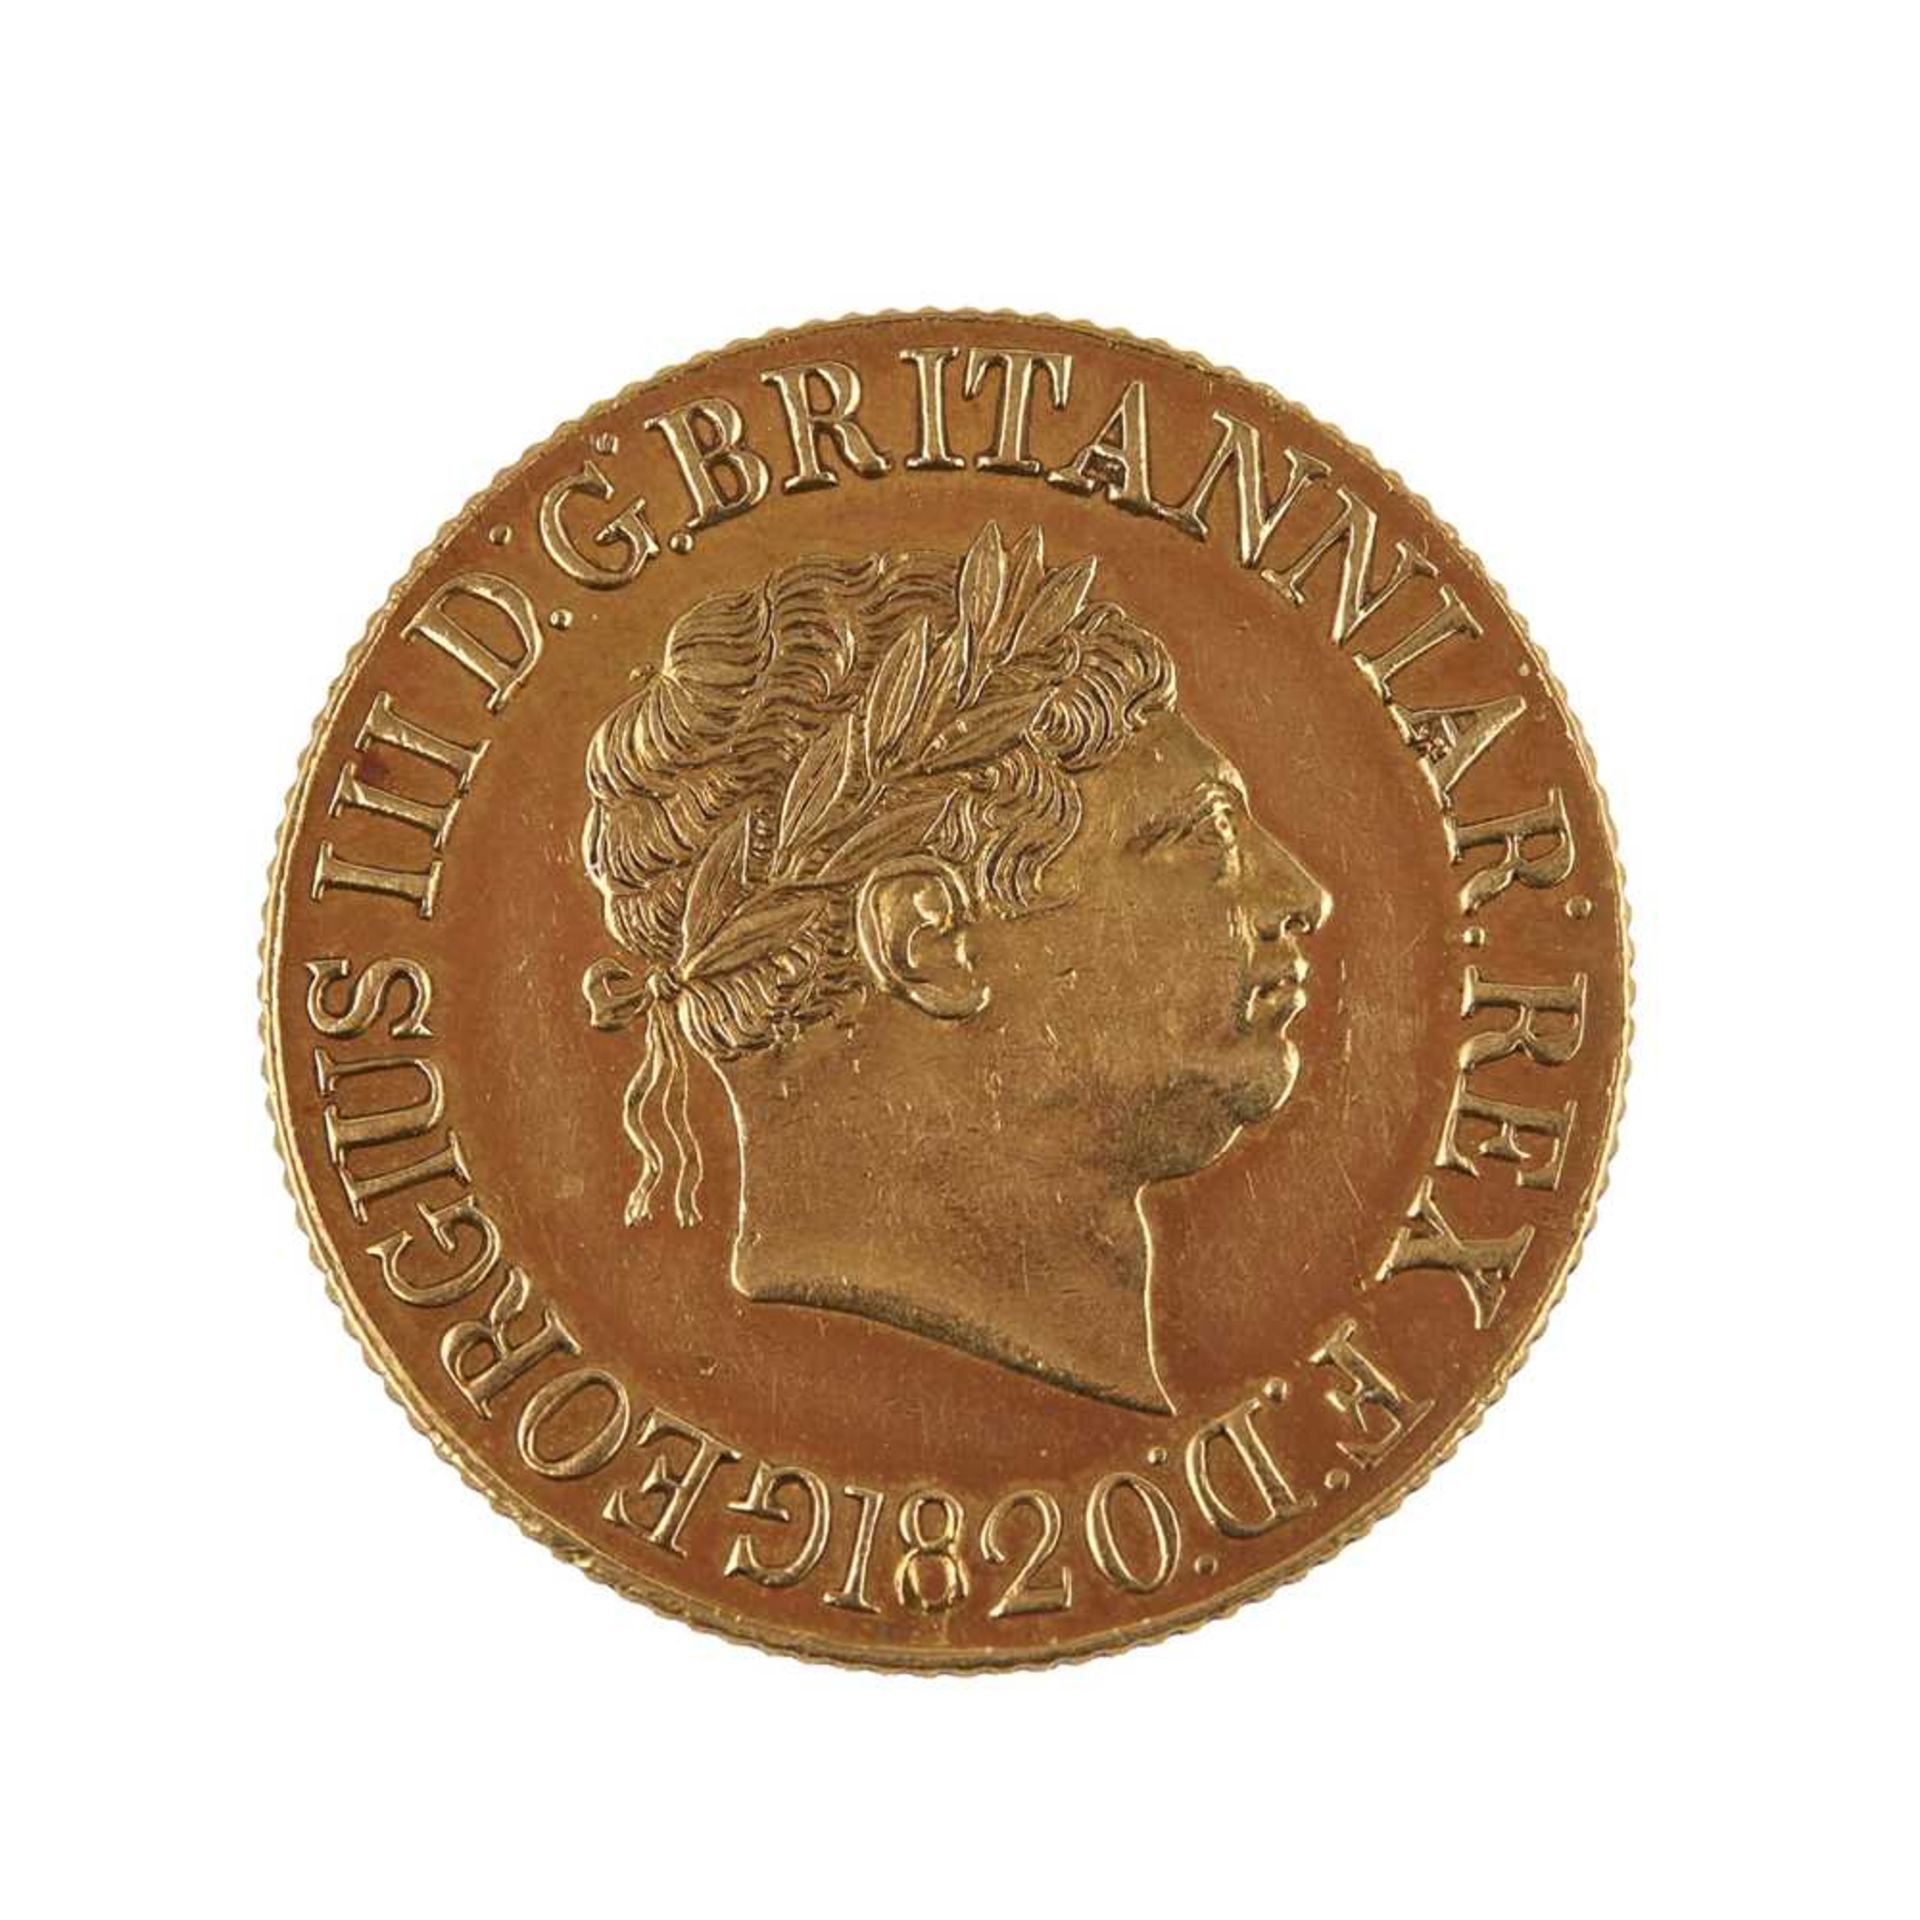 A George III sovereign